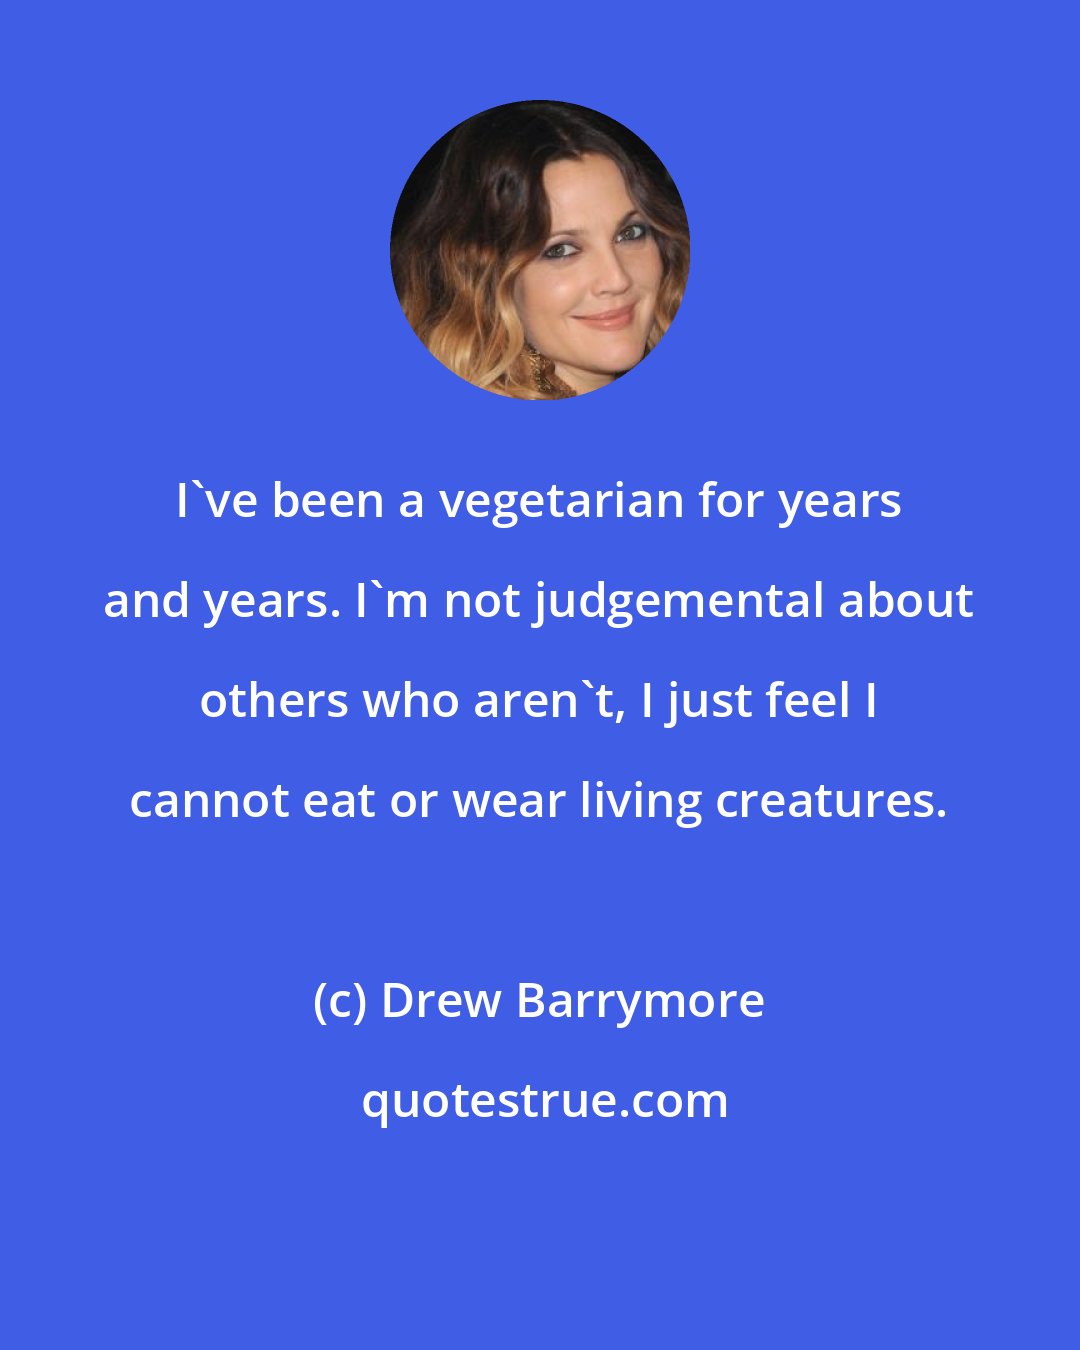 Drew Barrymore: I've been a vegetarian for years and years. I'm not judgemental about others who aren't, I just feel I cannot eat or wear living creatures.